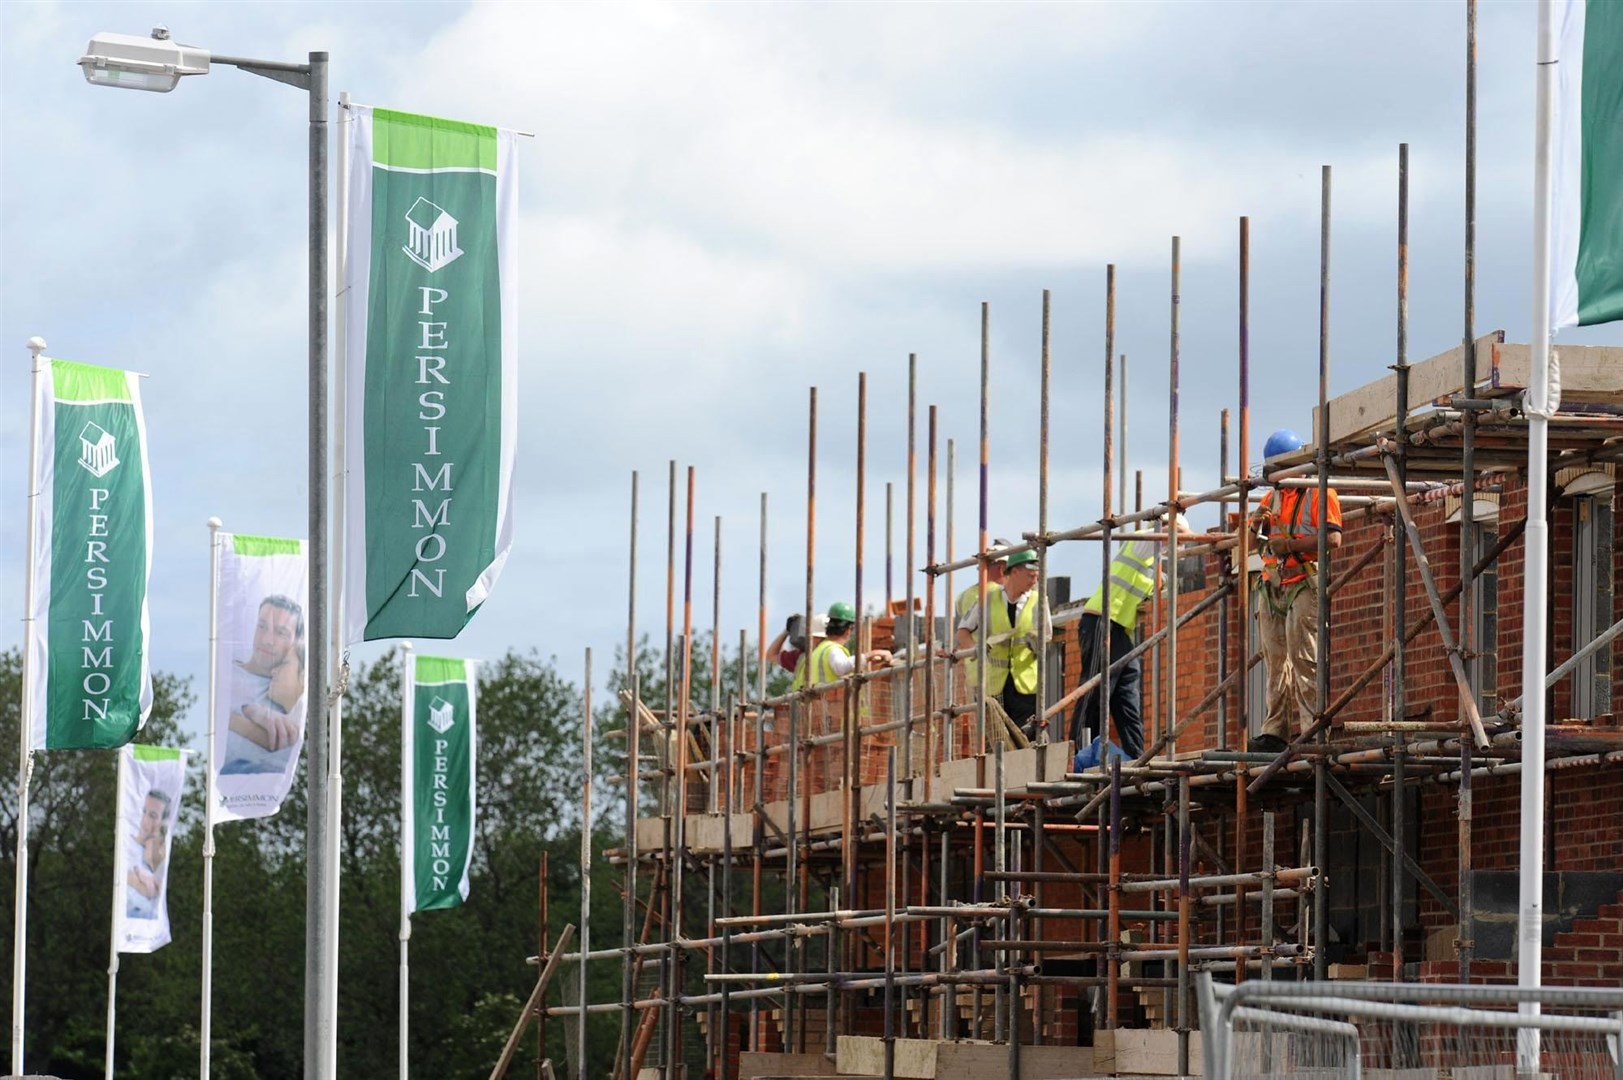 Housebuilder Persimmon has been relegated from the FTSE 100 after seeing its share price drop over the past year (Owen Humphreys/PA)